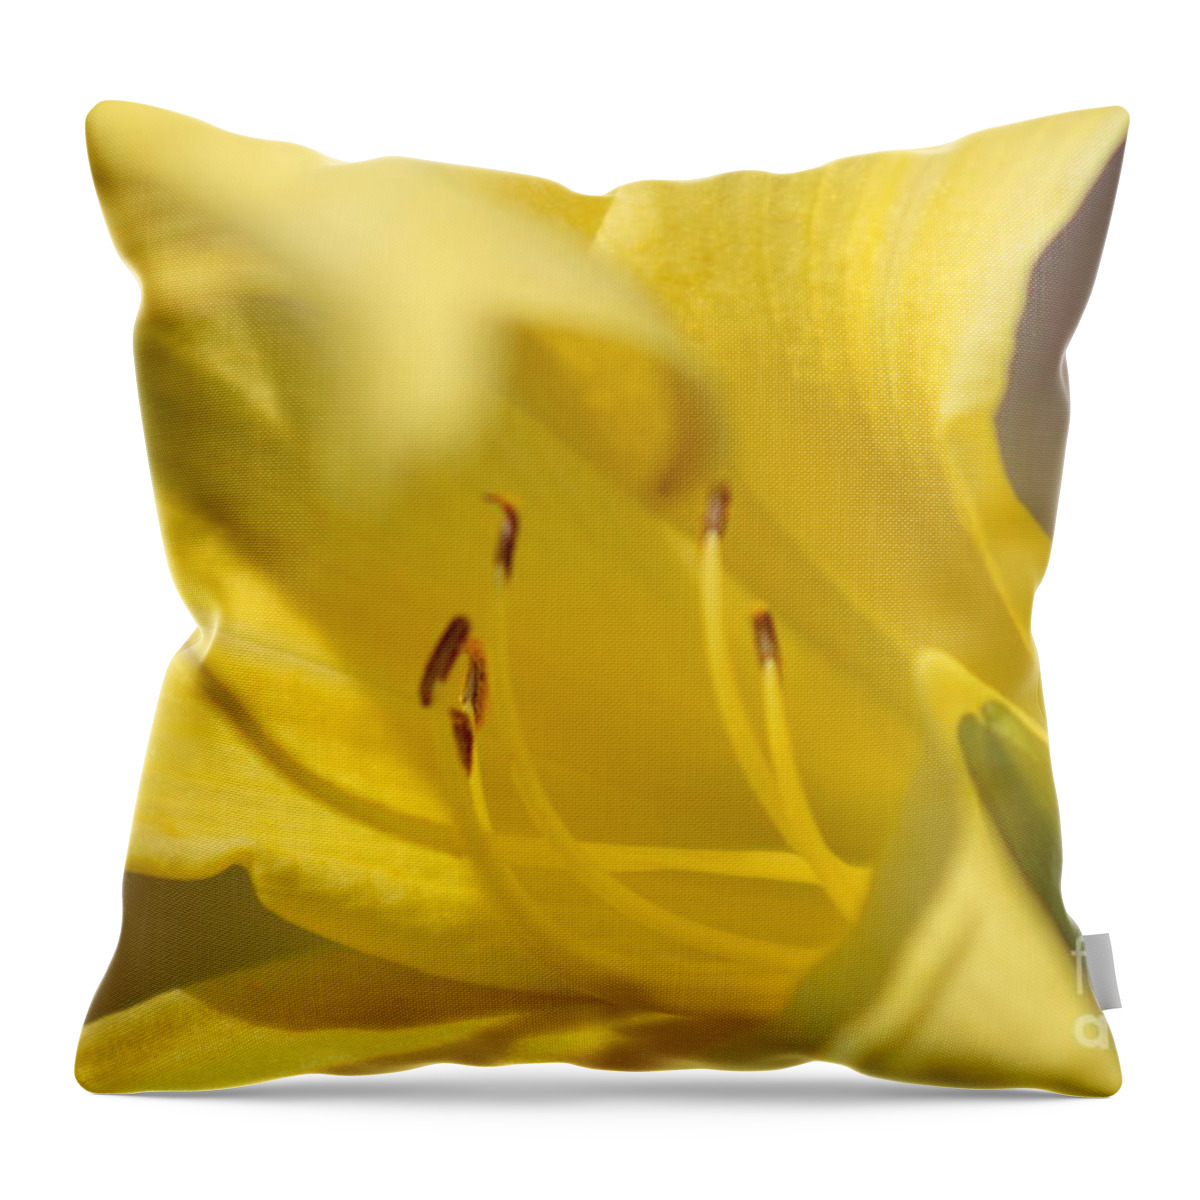 Yellow Throw Pillow featuring the photograph Nature's Beauty 47 by Deena Withycombe